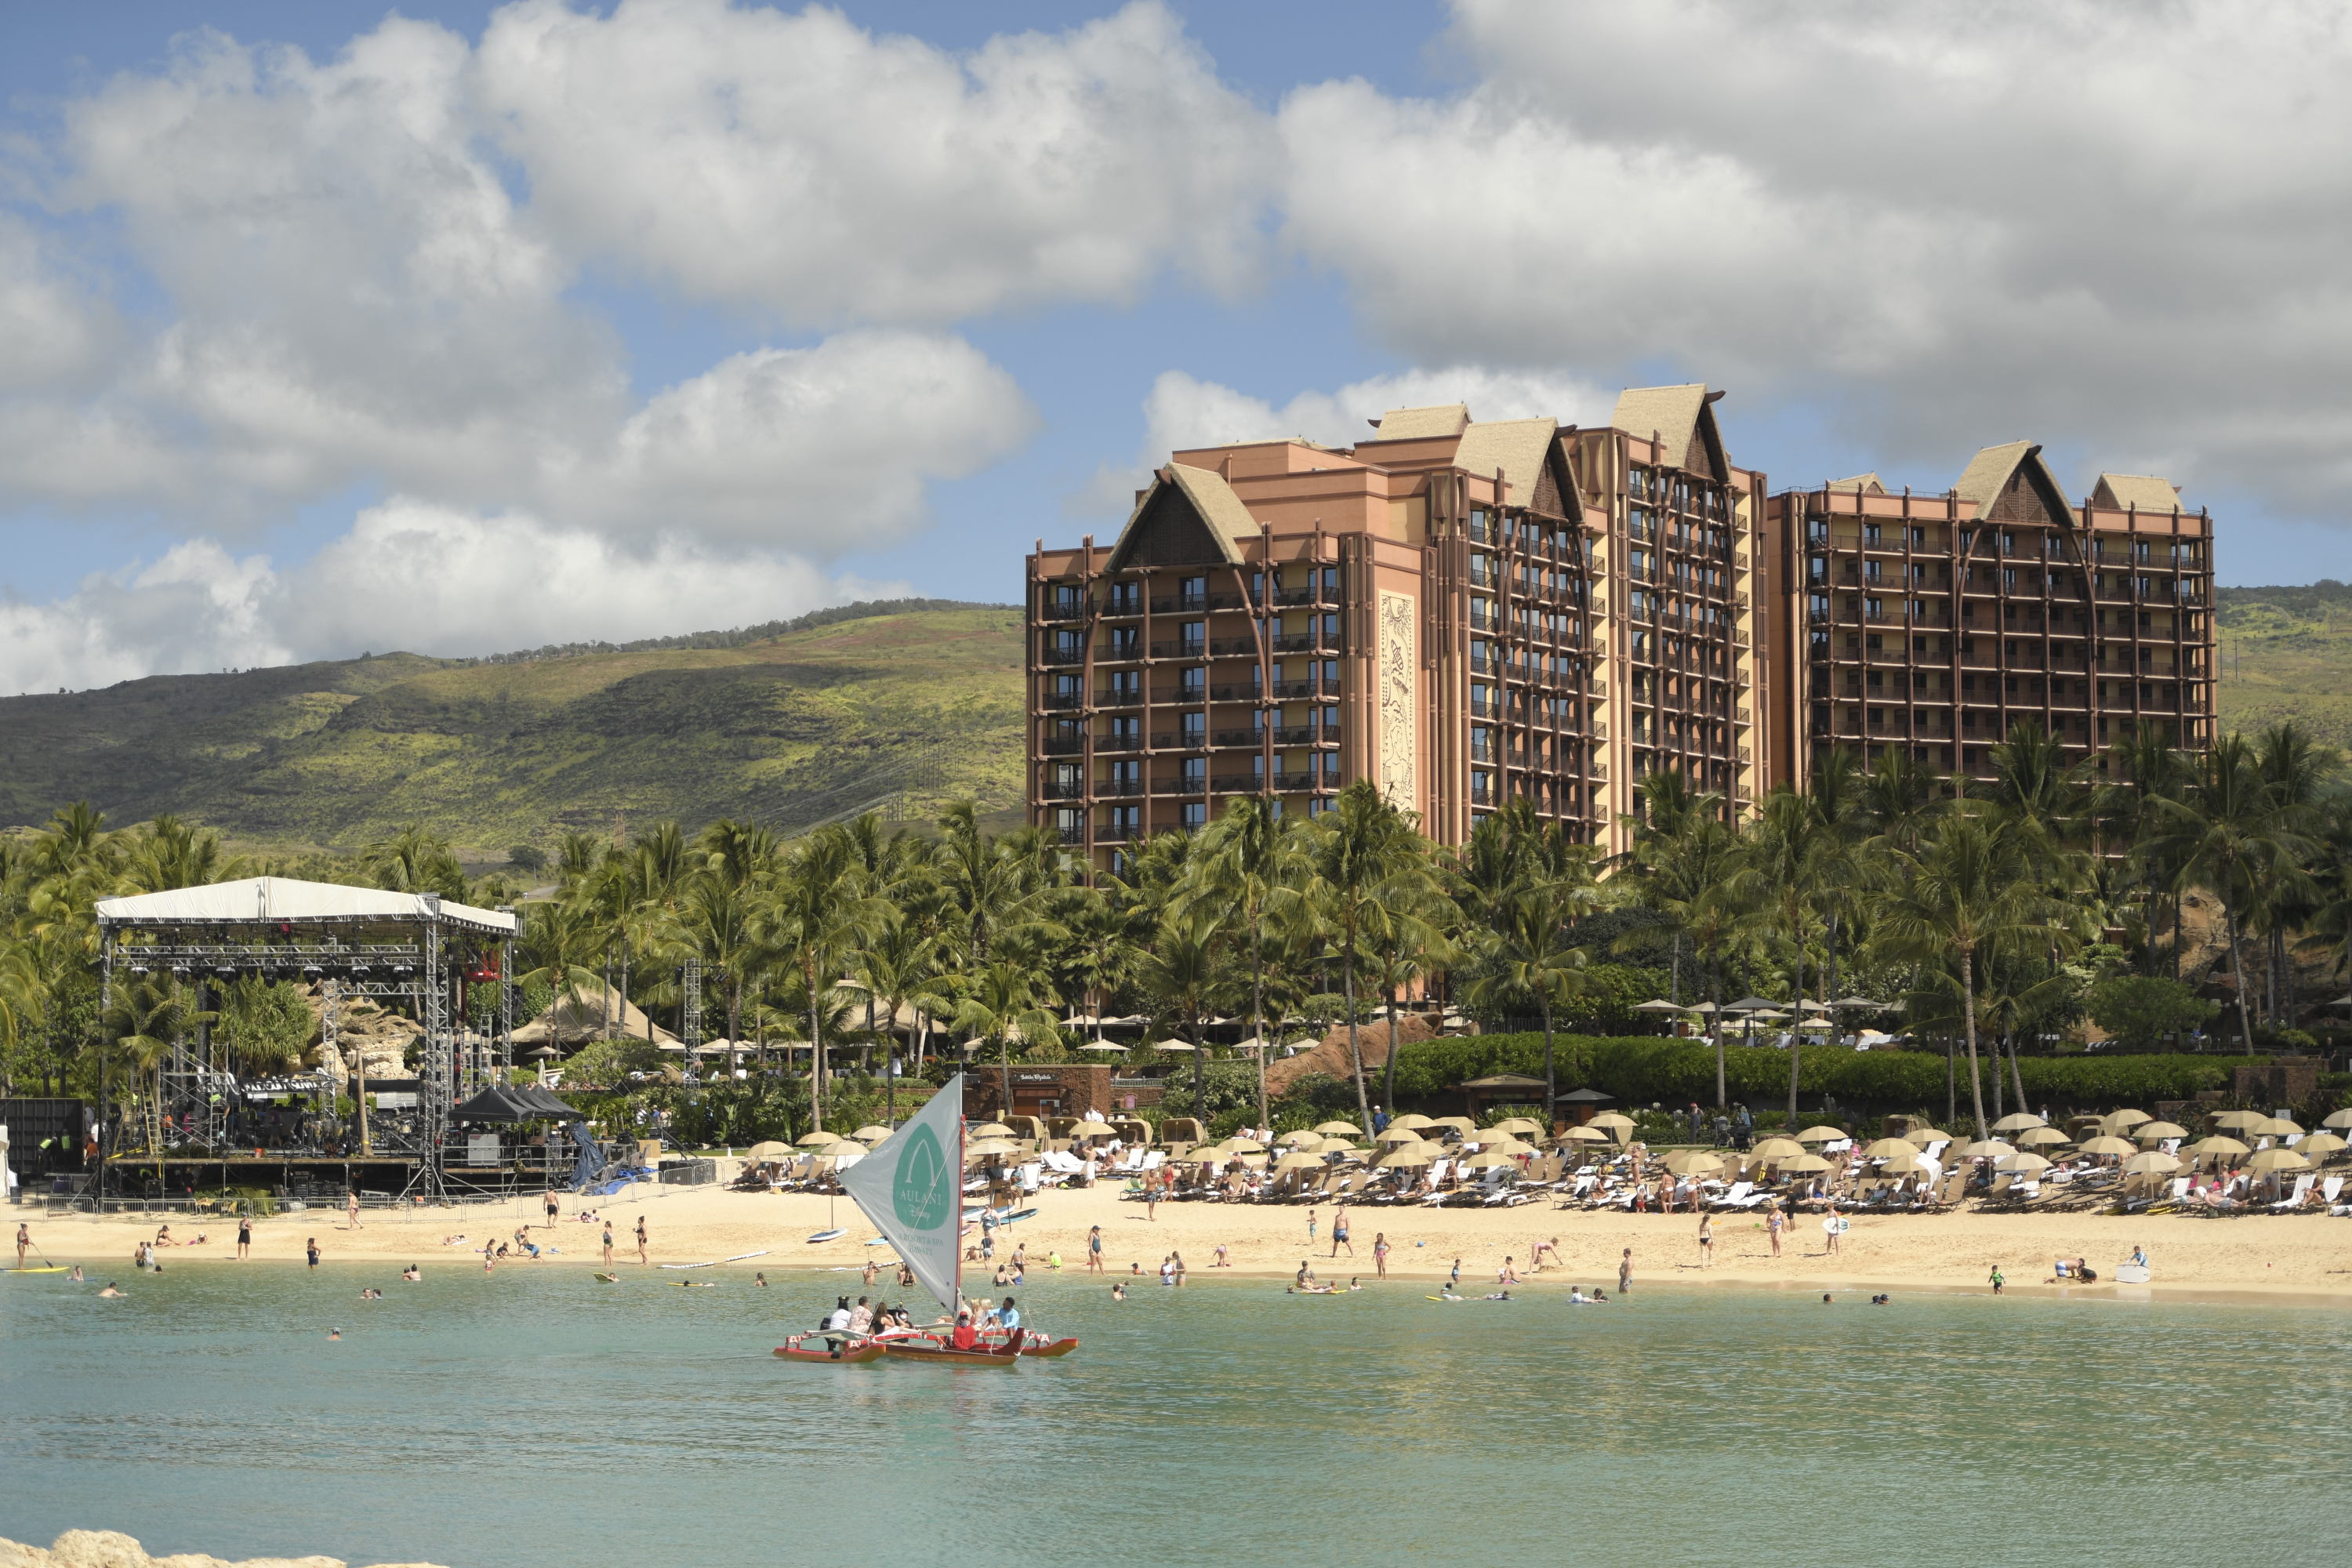 The resort seeks to immerse guests in an authentic Hawaiian experience